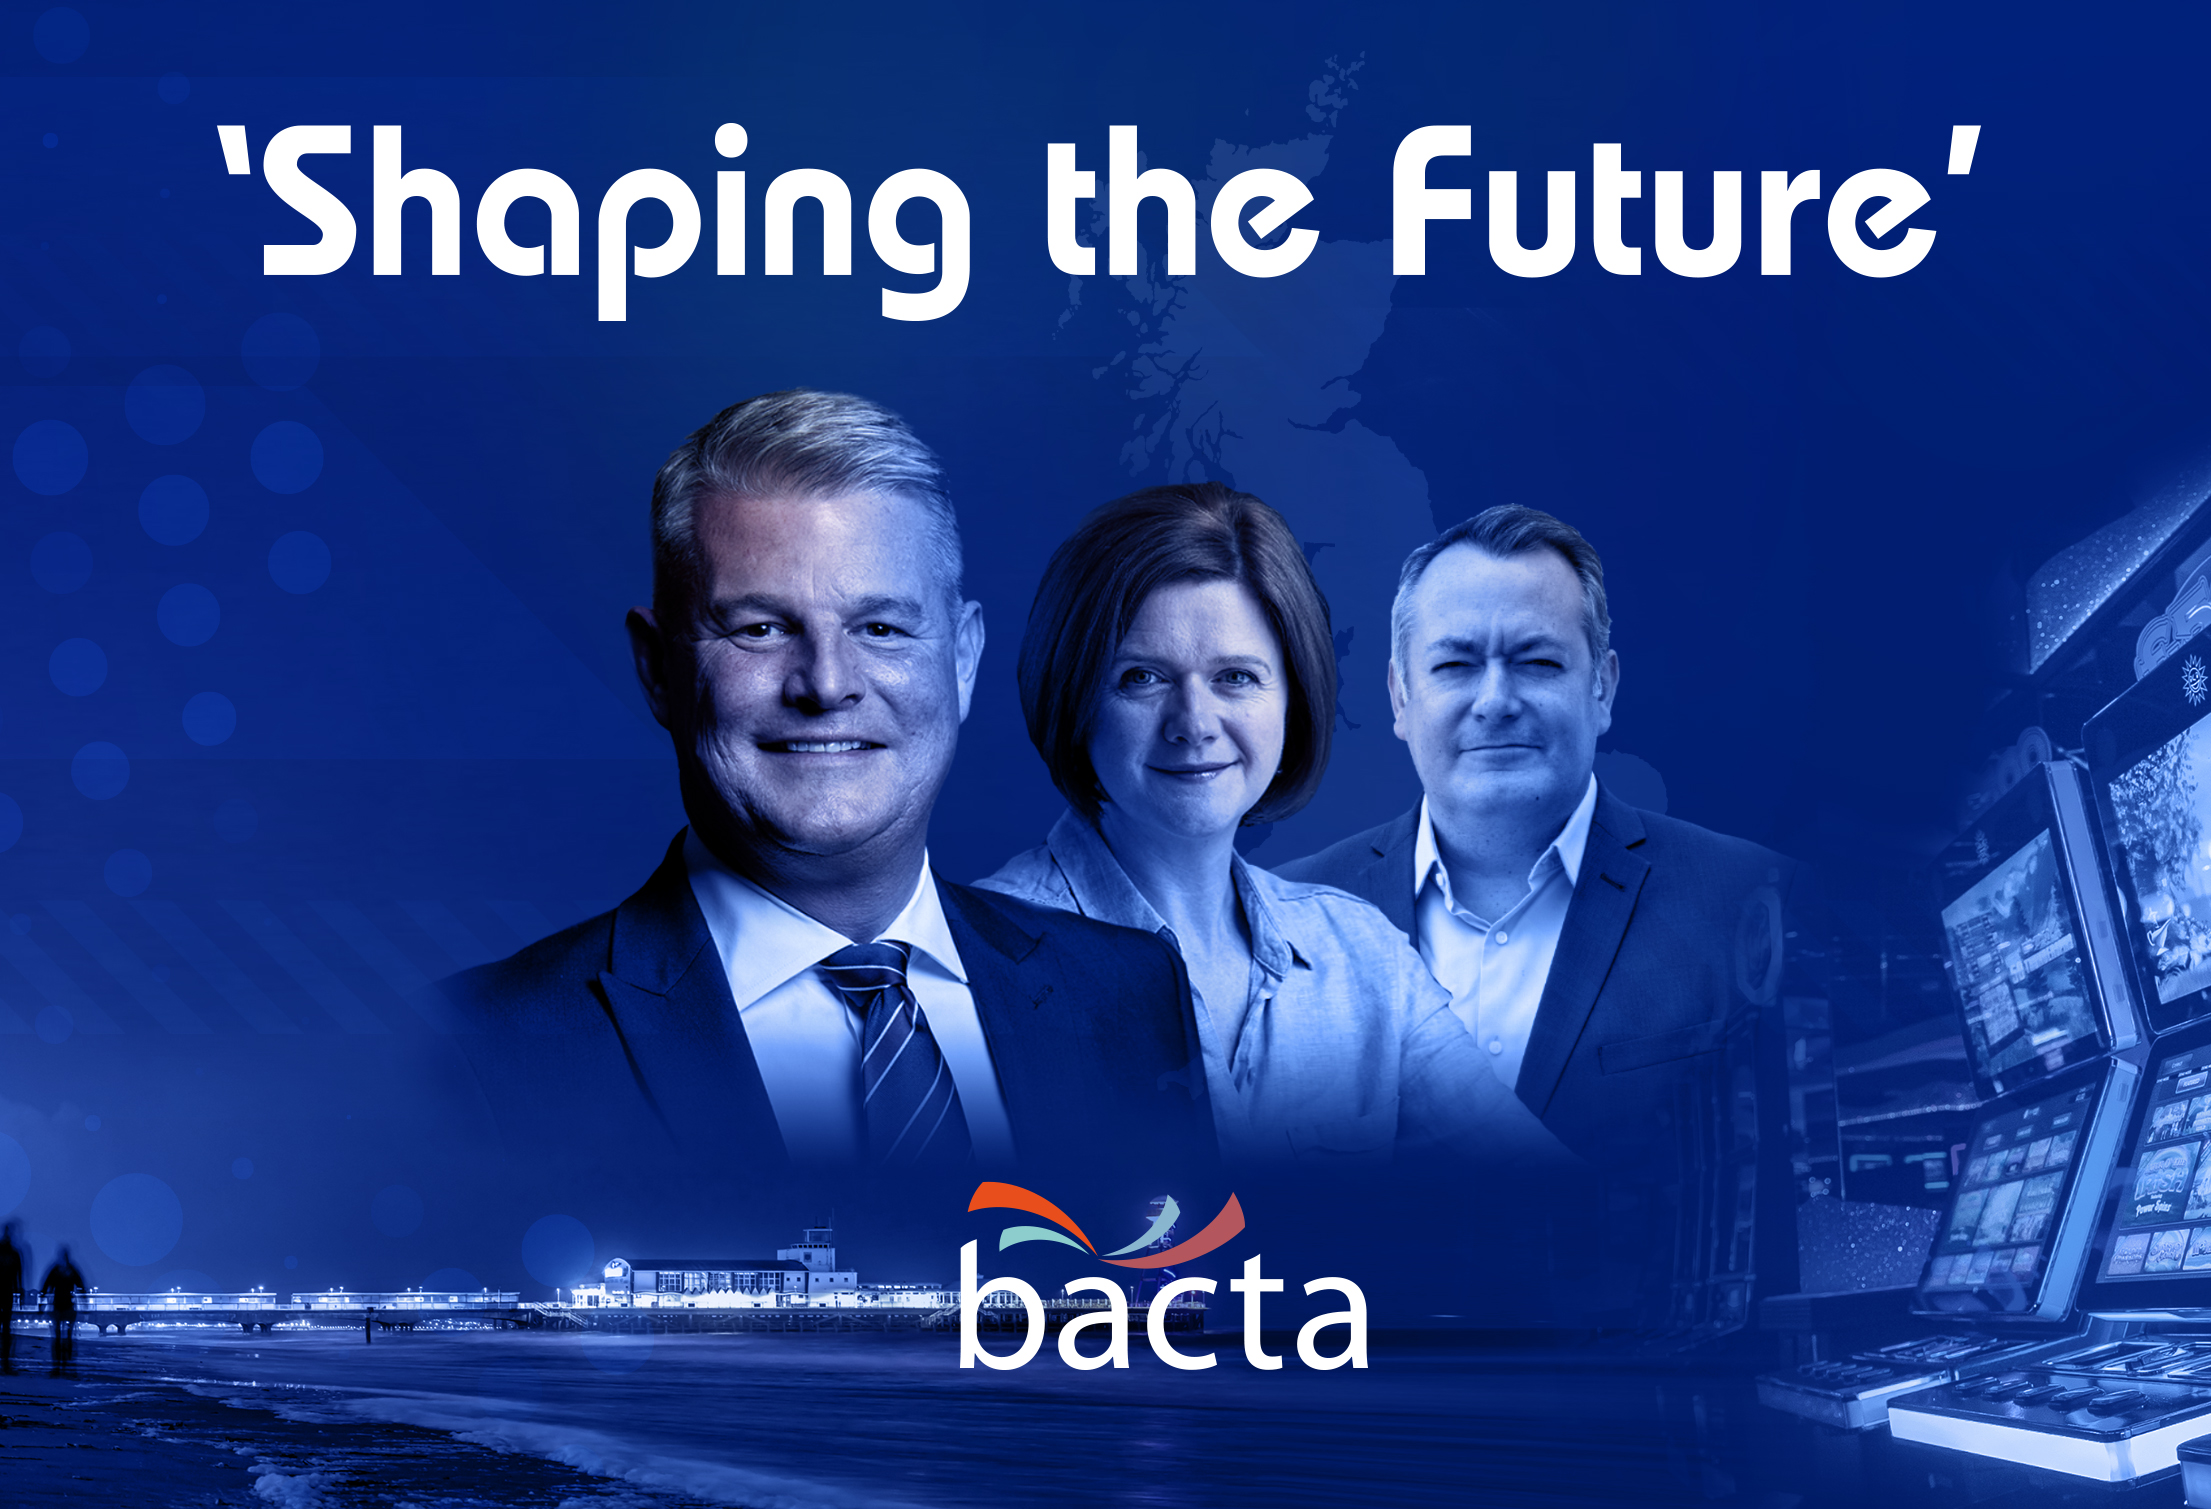 bacta-unveil-‘shaping-the-future’-theme-for-november-convention